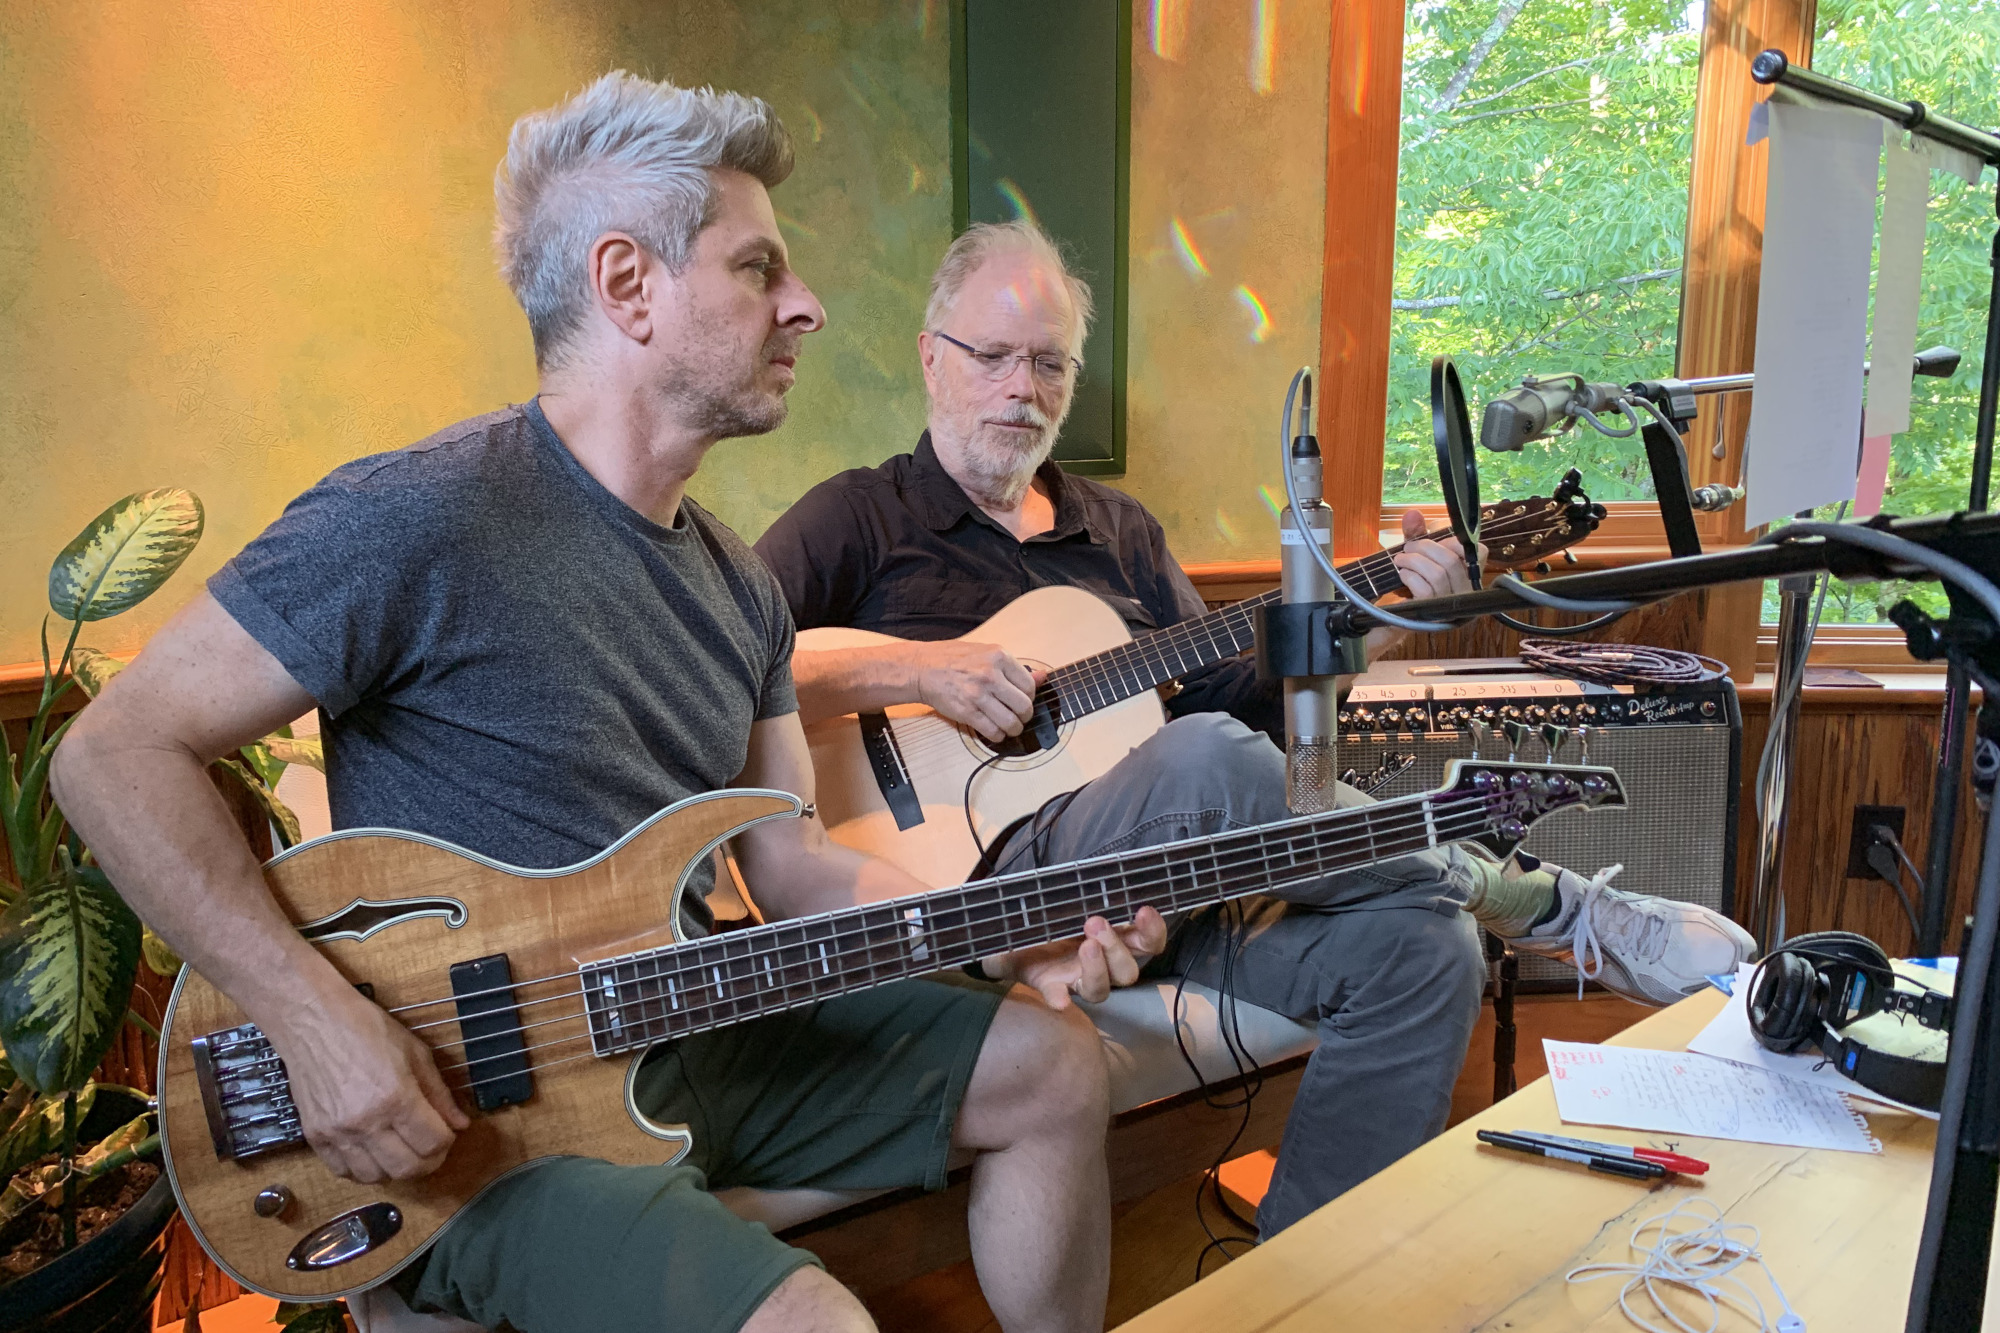 Mike Gordon and Leo Kottke announced 'Noon' due out on August 28th